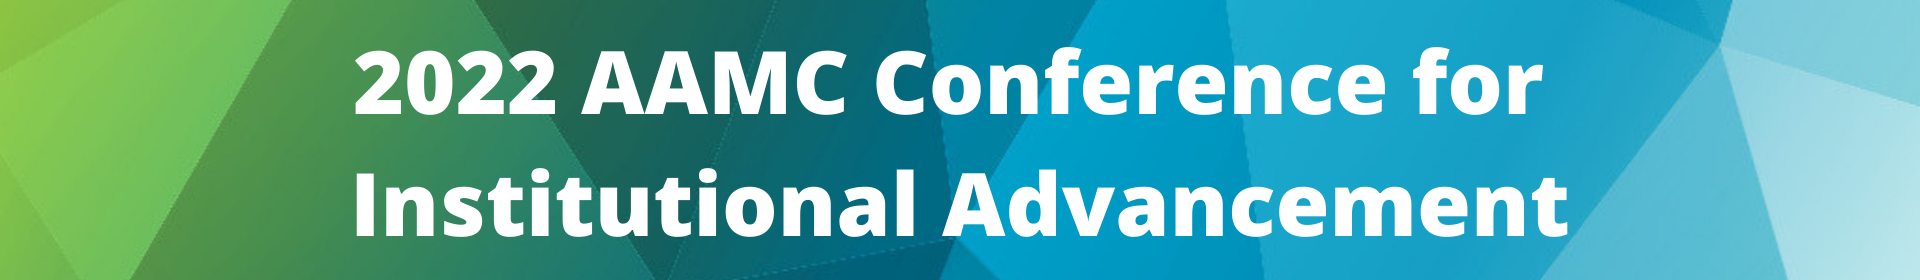 2022 AAMC Conference for Institutional Advancement Event Banner